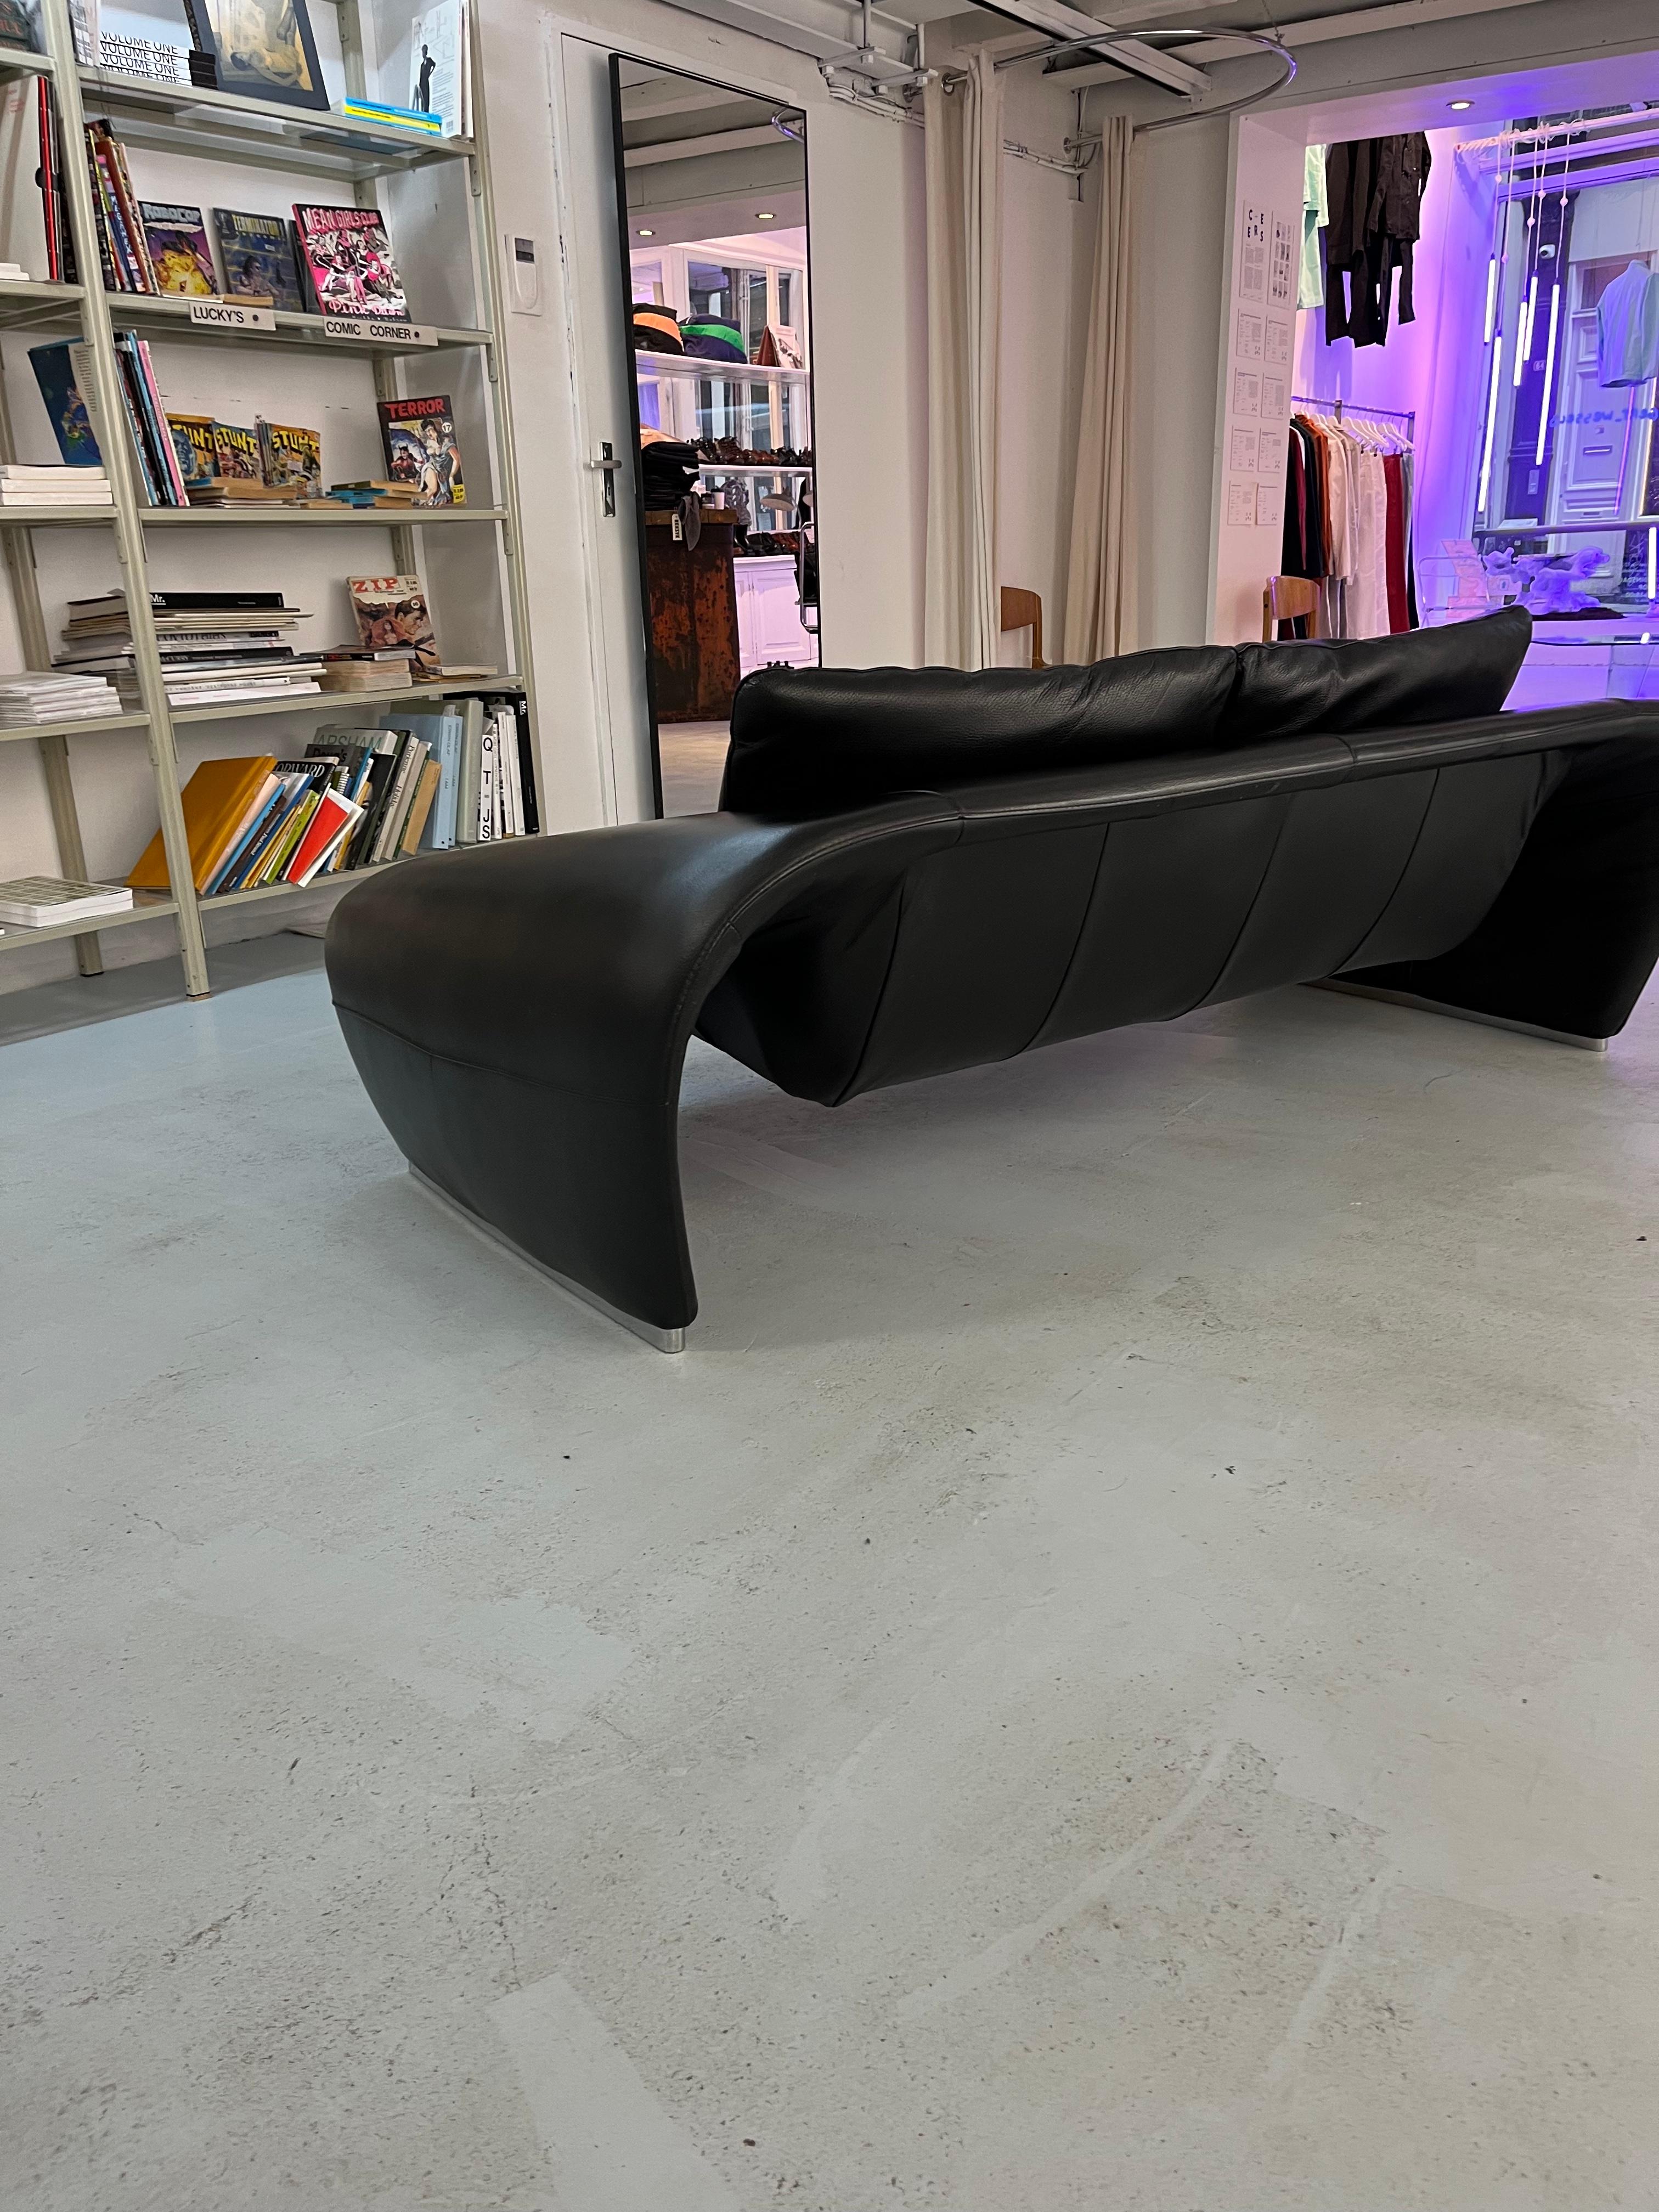 With this 'batman' sofa you will definitely spice up your interior. In case you immediately fall in love: we have a second, larger one in stock too!

In the early 2000s, the french designer Sylvain Joly reunited space age and awkward postmodern